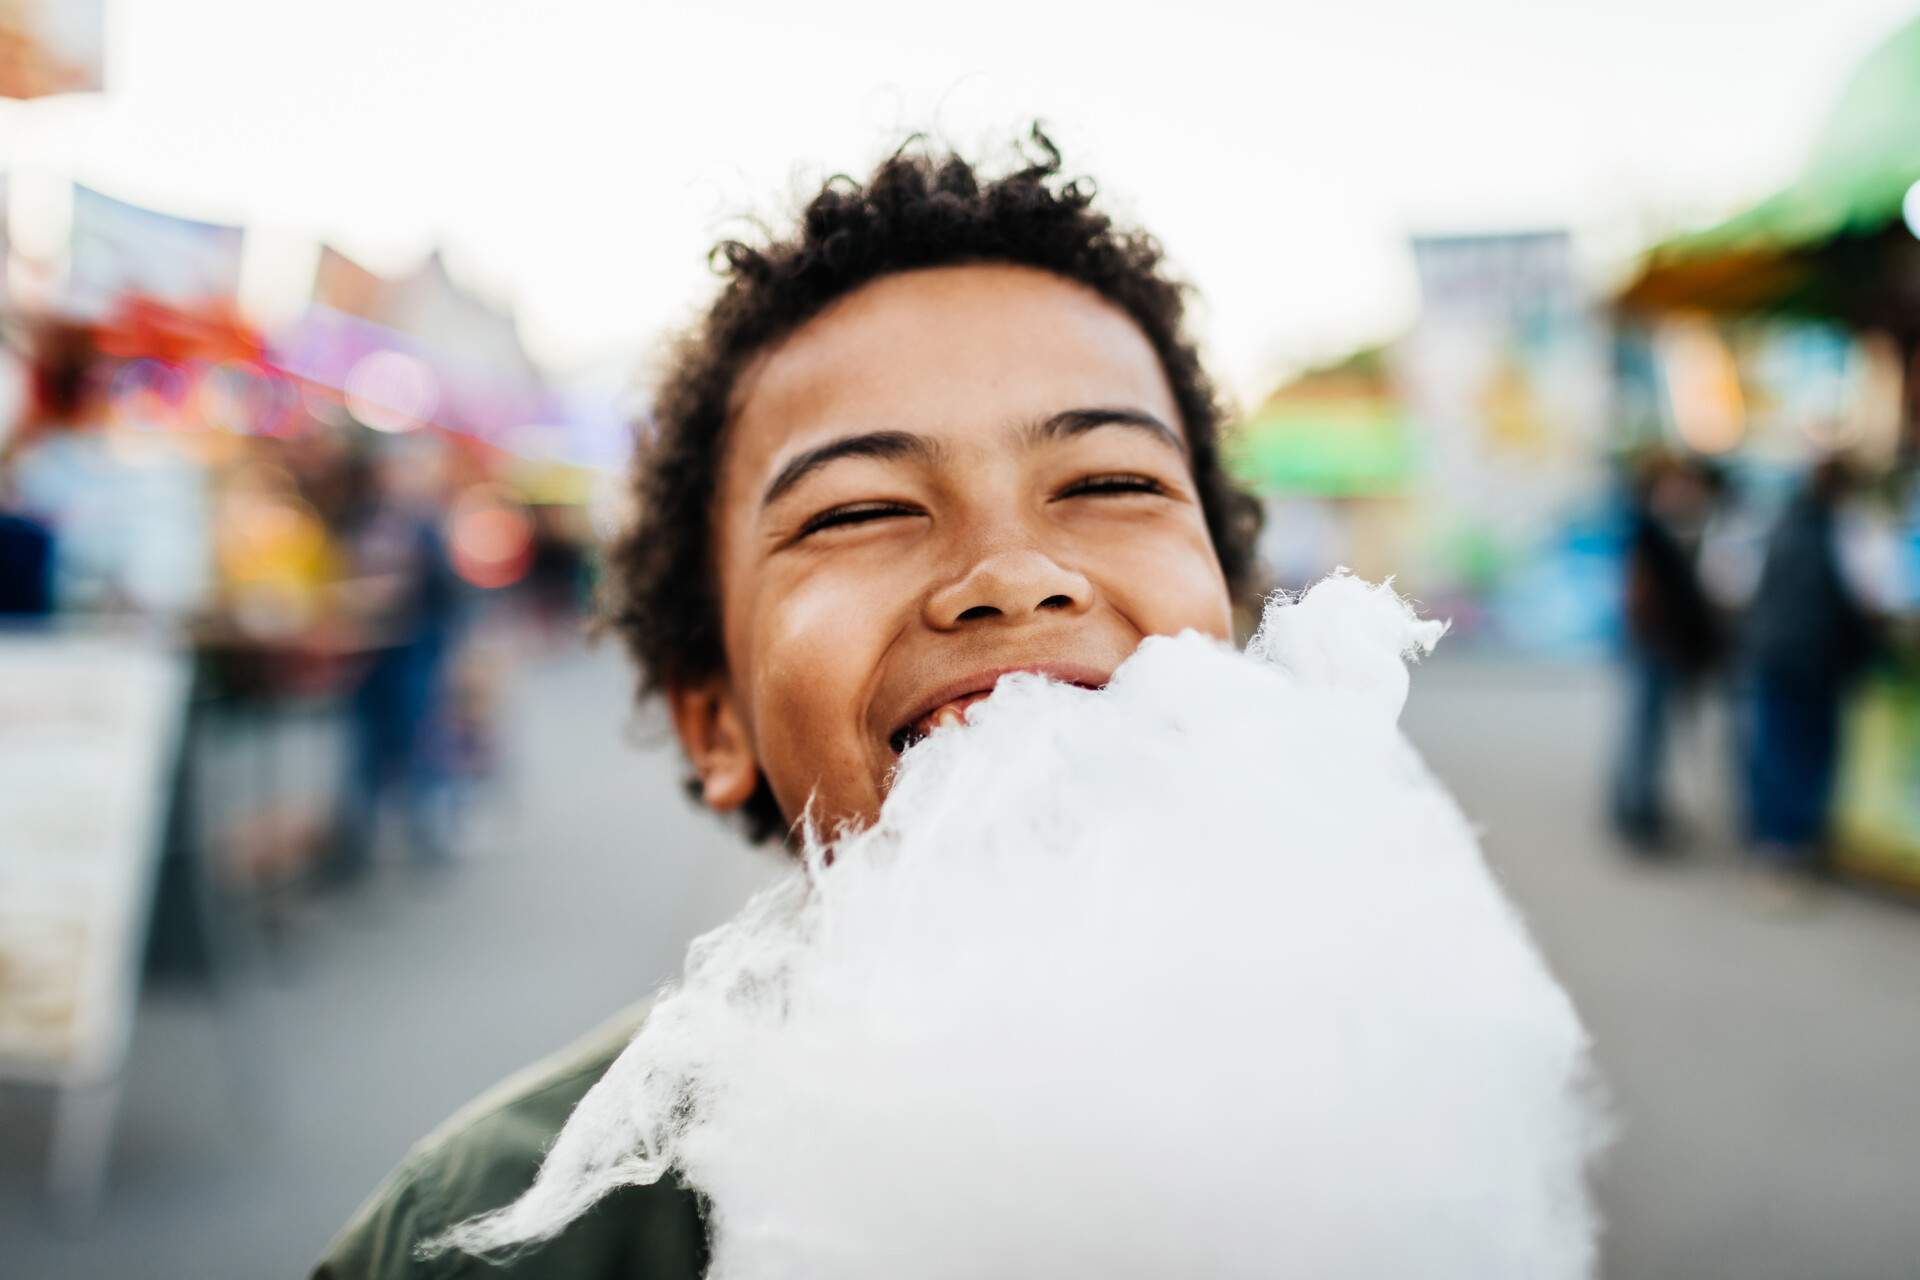 A curly-haired boy smiles as he enjoys eating a cotton candy.